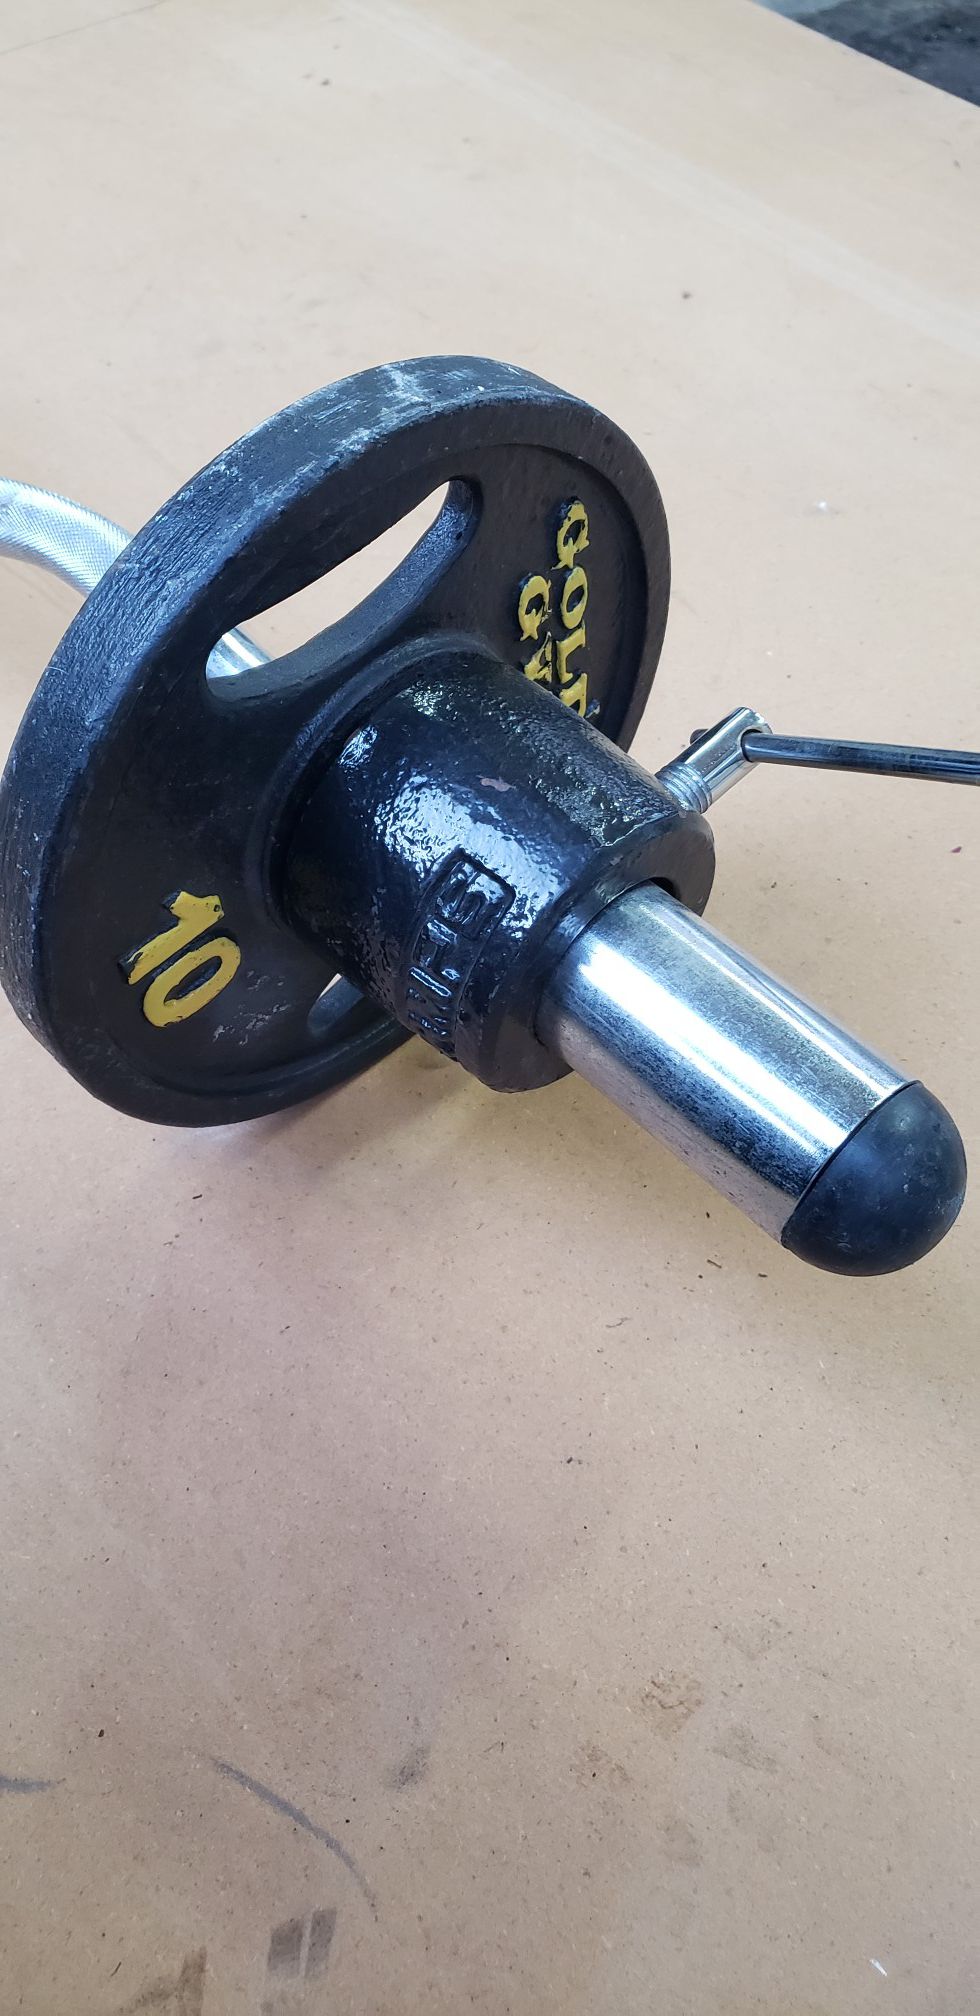 OLYMPIC EASY CURL BAR PLUS 20 POUNDS OF GOLD'S GYM WEIGHT PLATES